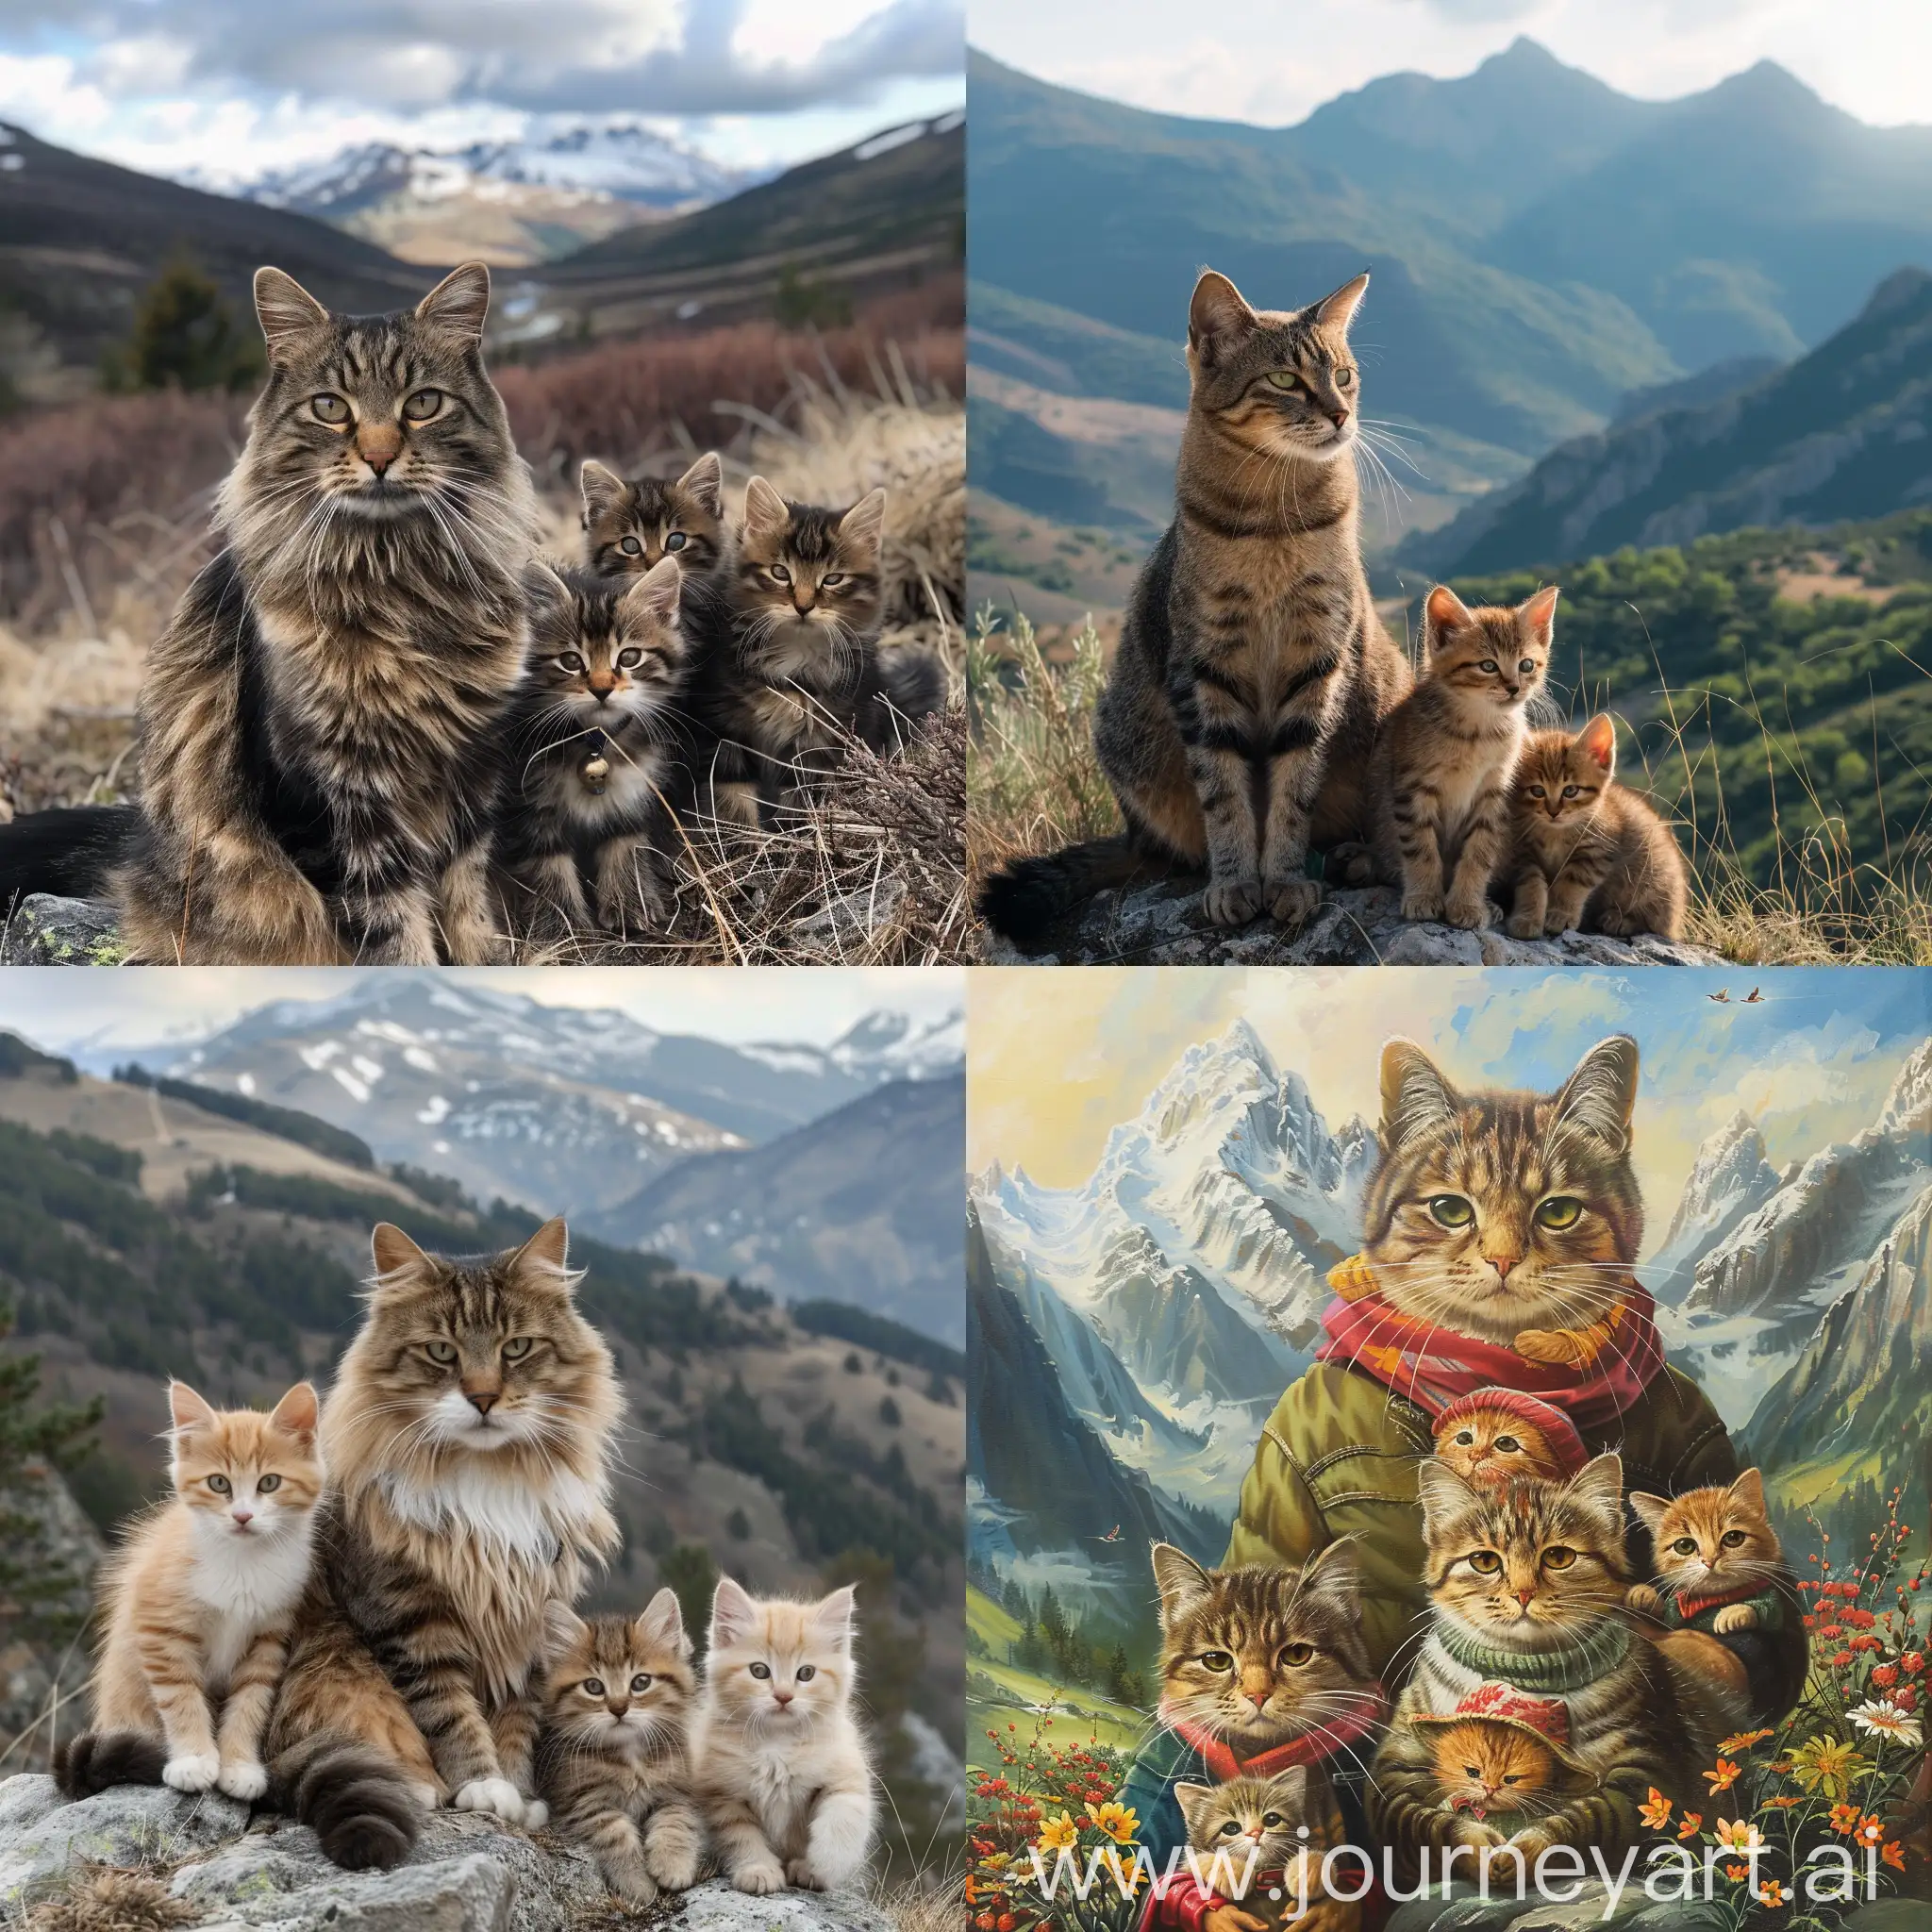 A cat with his family in mountains